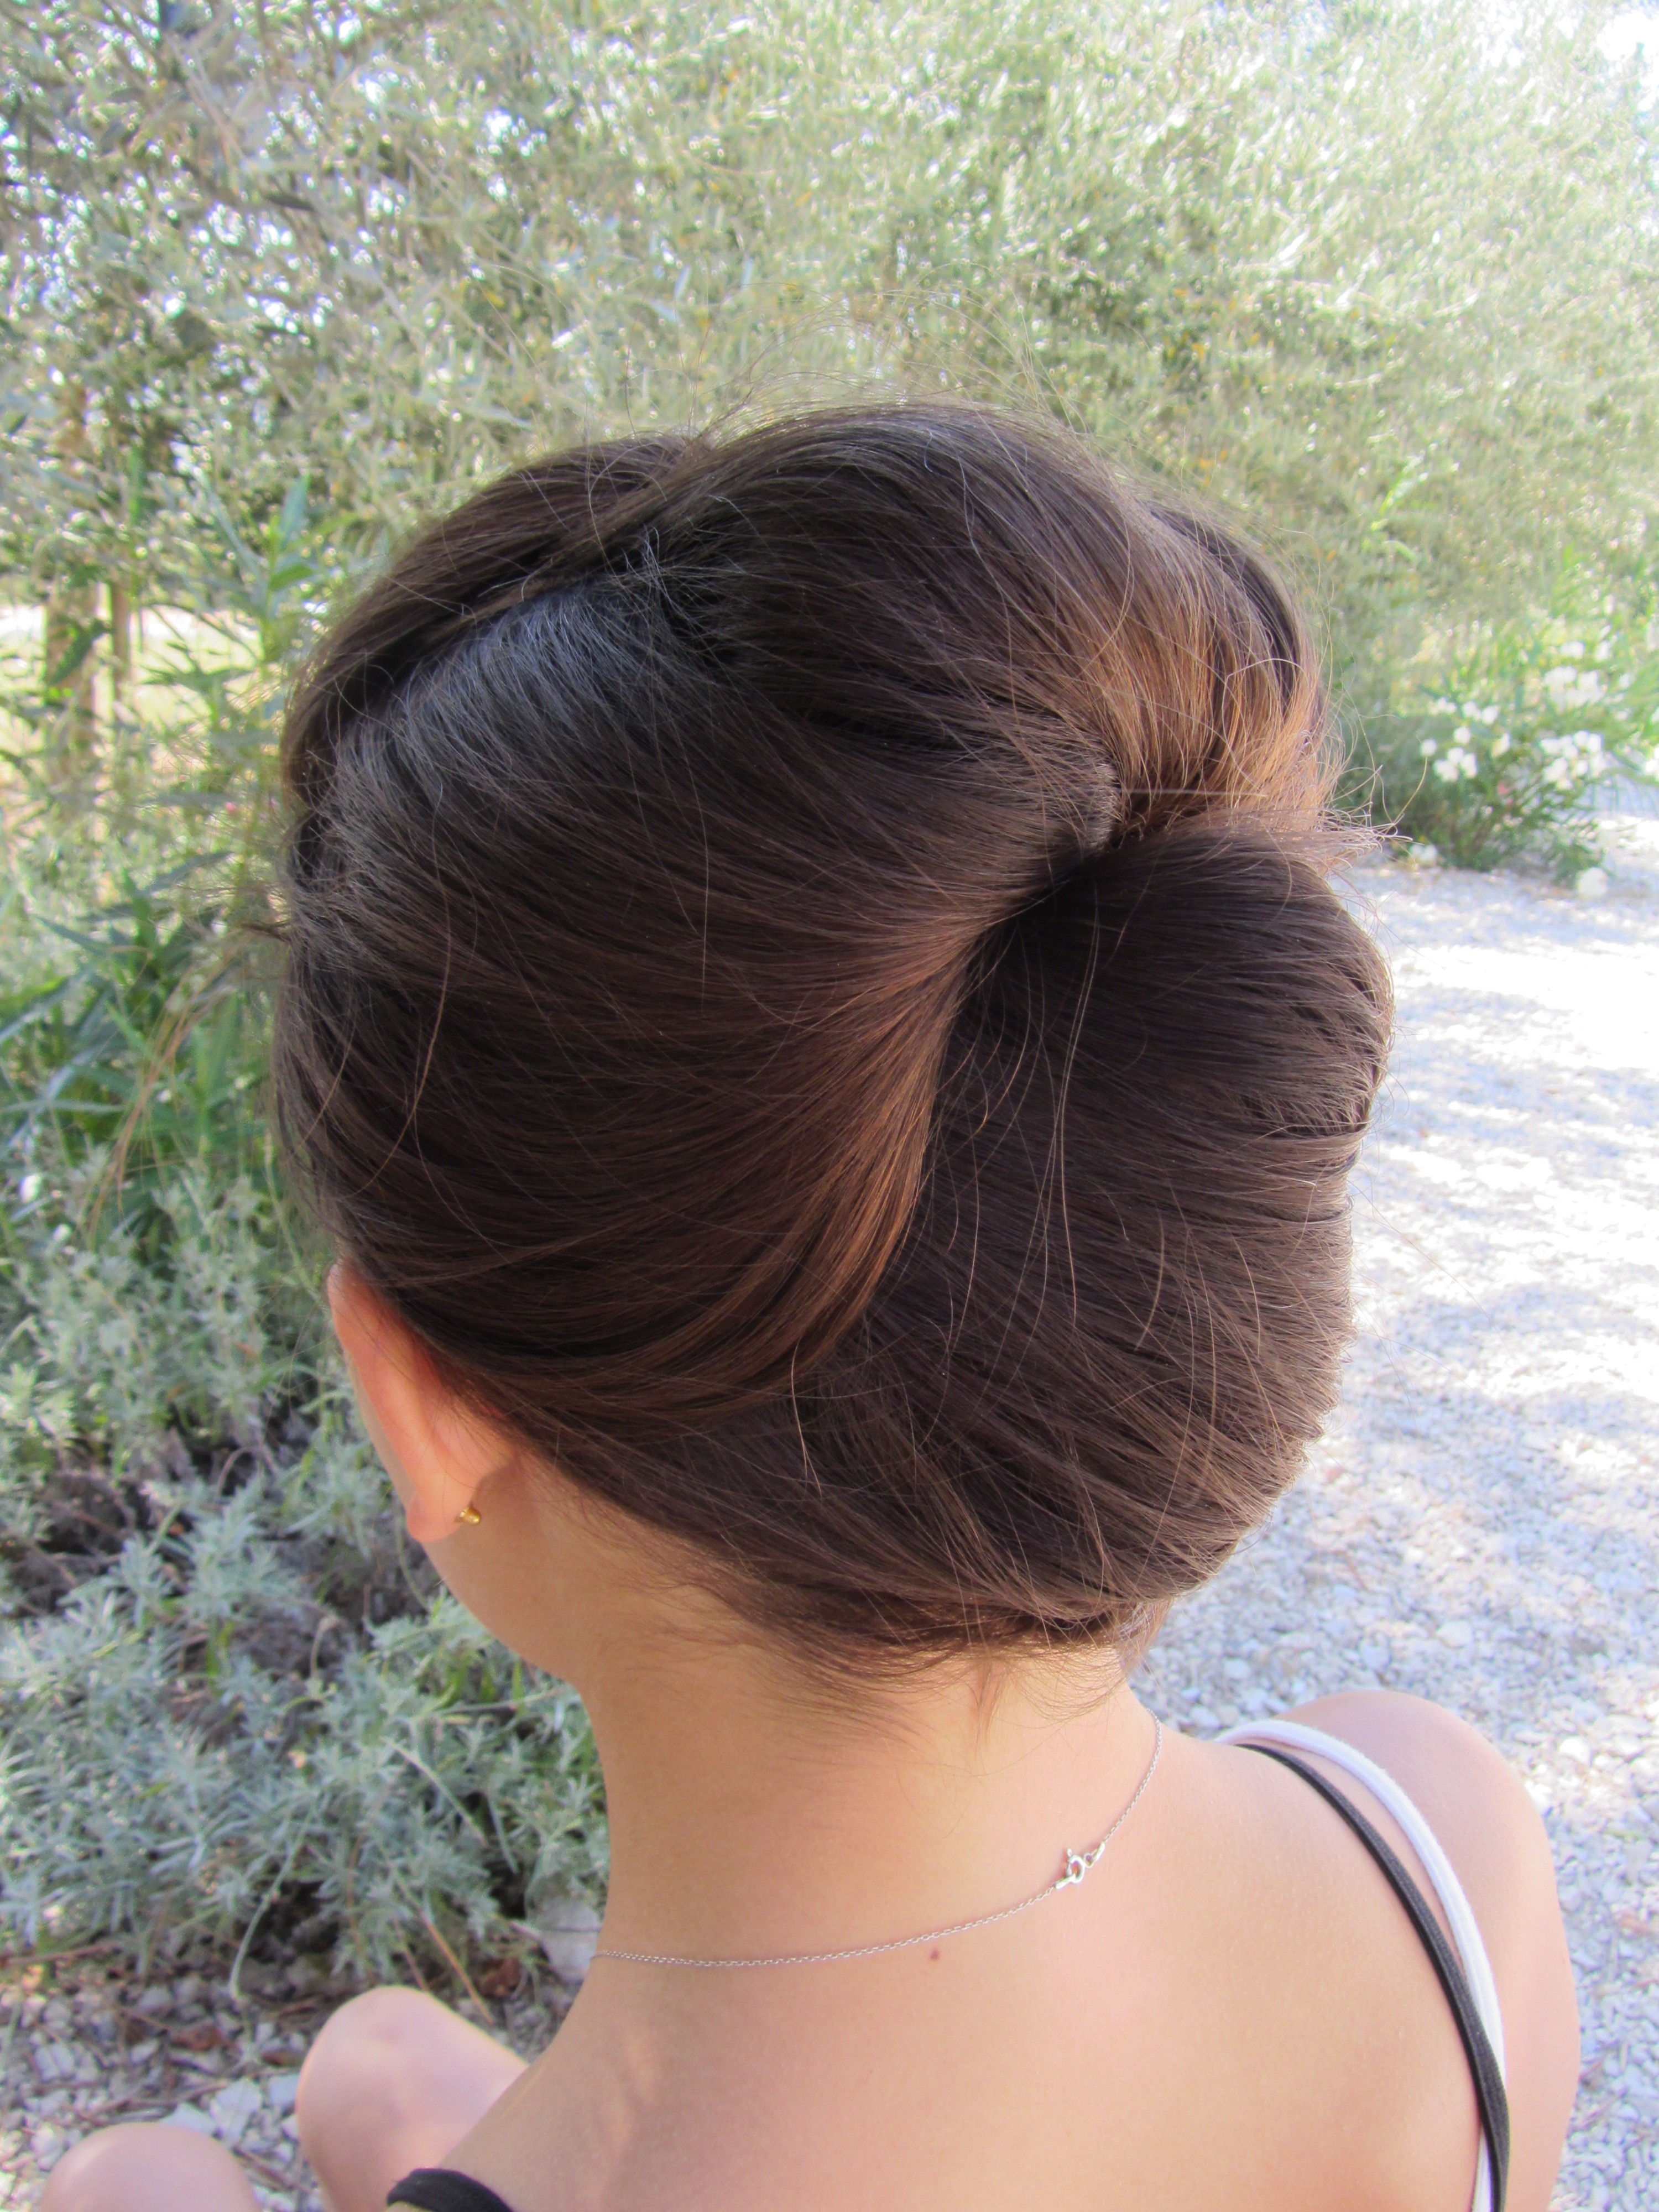 How to: Double poof french twist